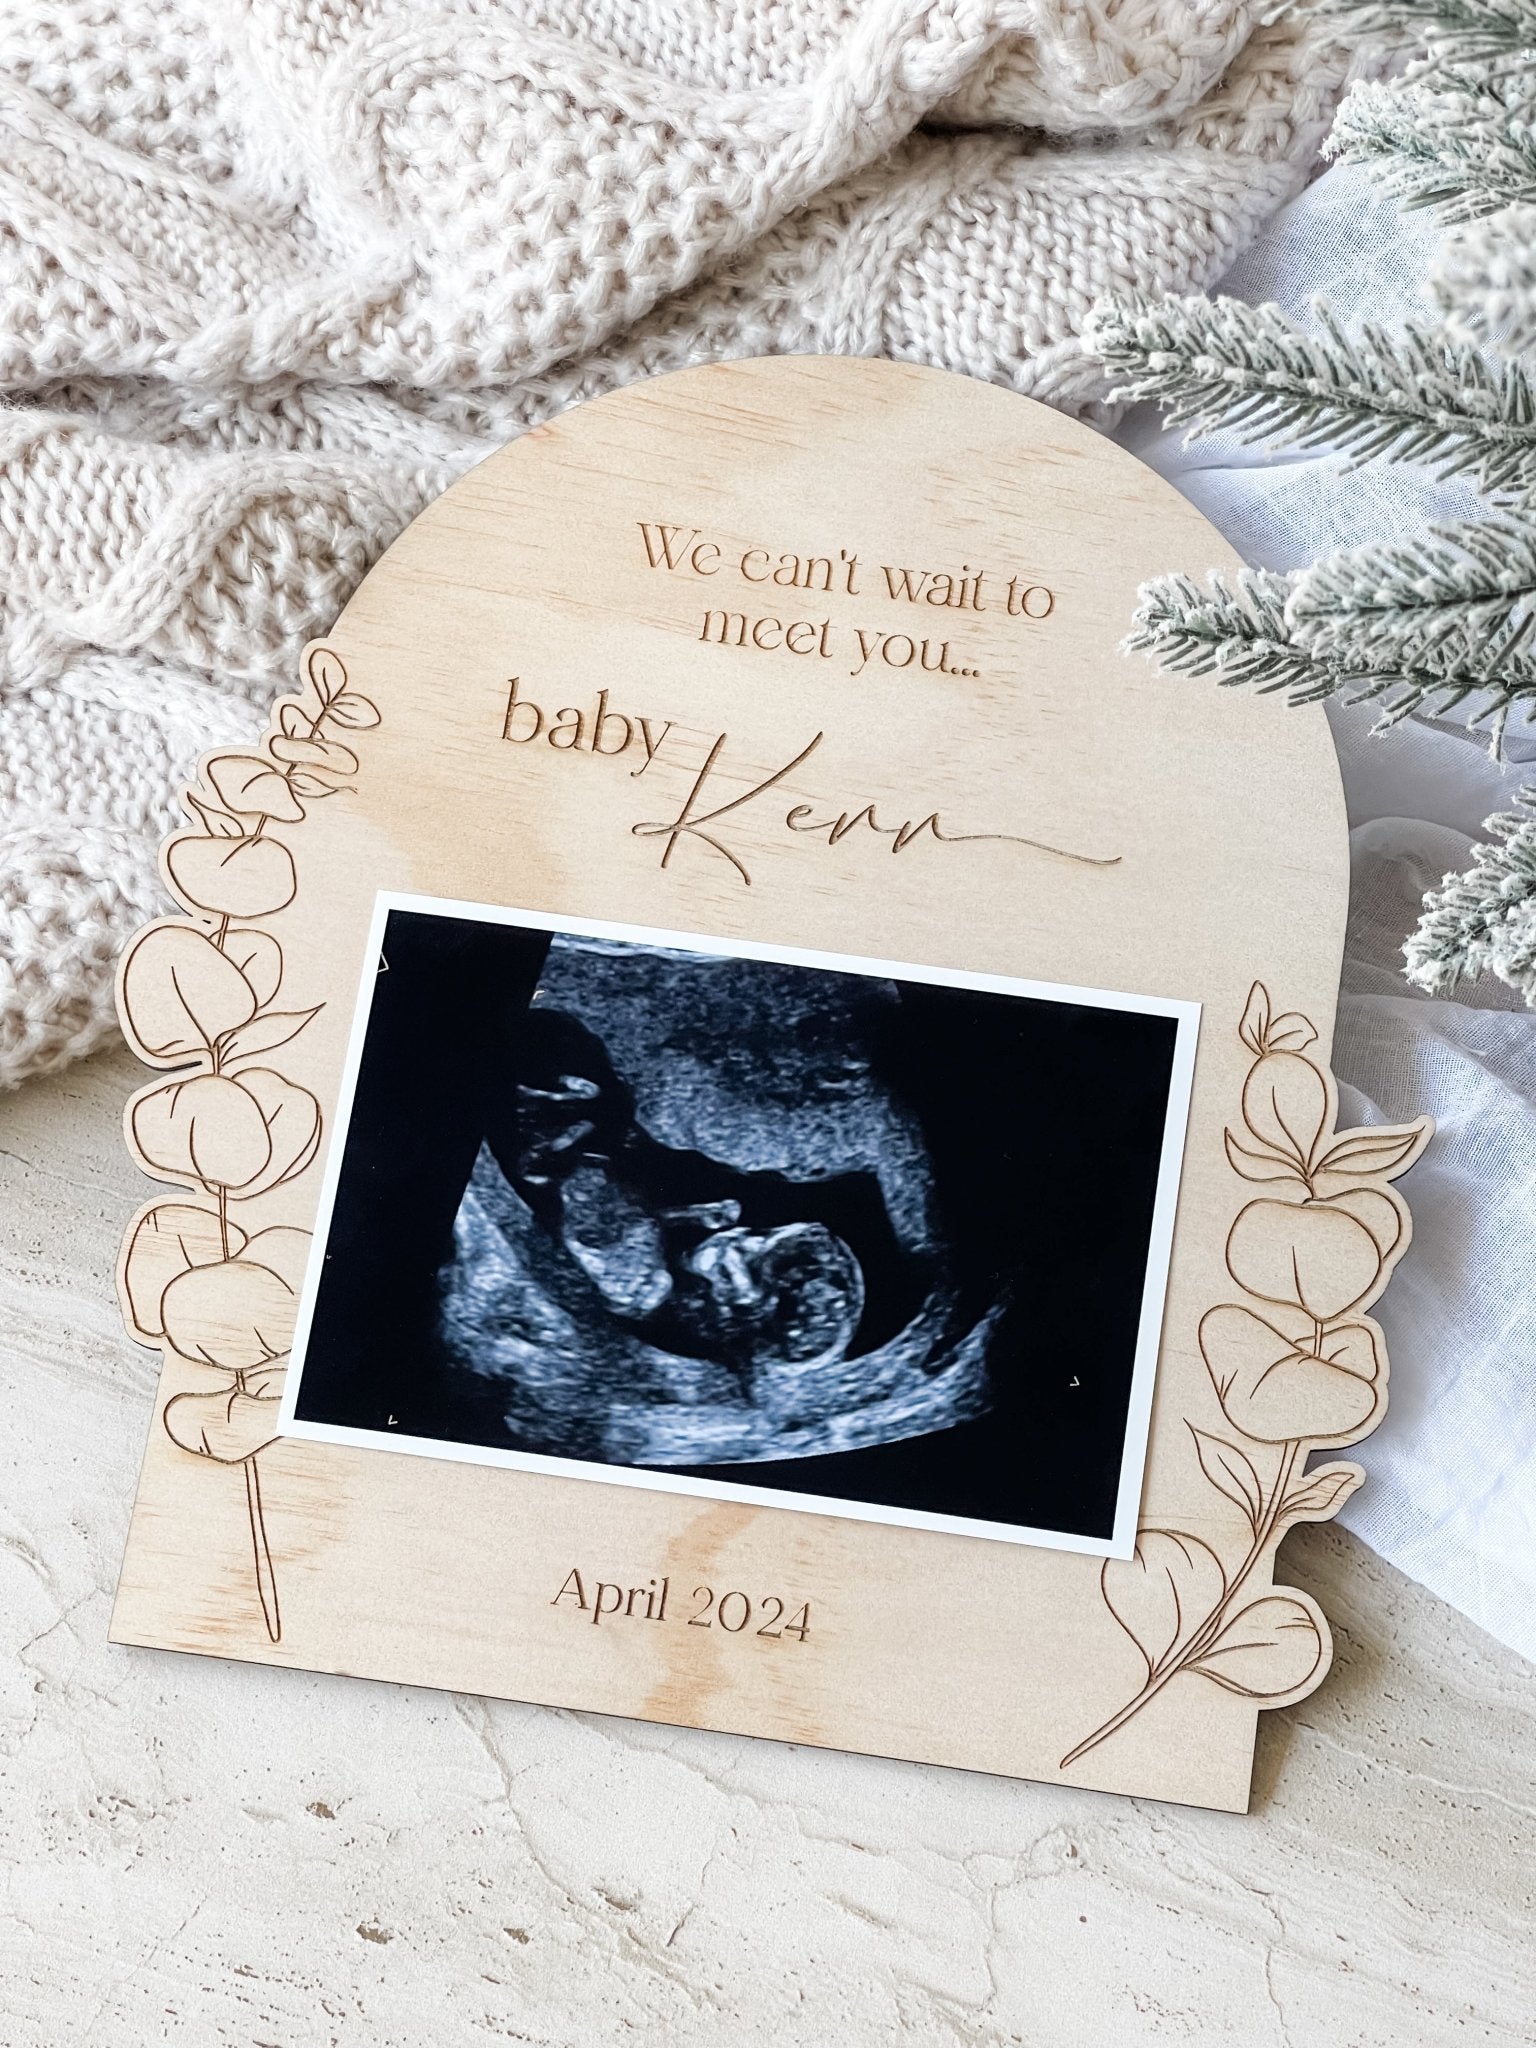 We can't wait to meet you... Baby 'Surname' Photo Plaque - The Humble Gift Co.